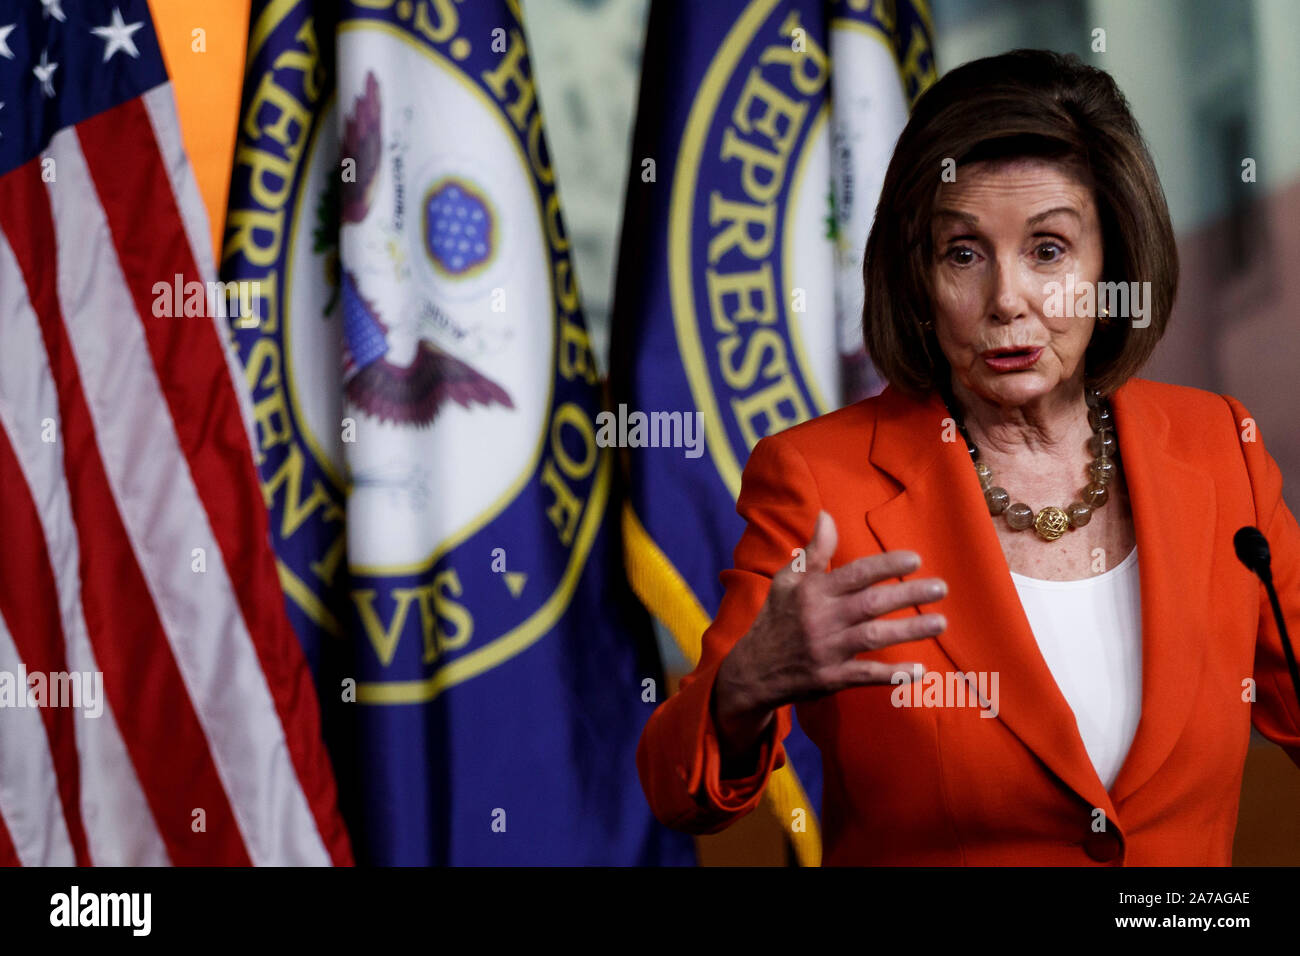 Washington, USA. 31st Oct, 2019. U.S. House Speaker Nancy Pelosi speaks during a press conference on Capitol Hill in Washington, DC, the United States, on Oct. 31, 2019. The U.S. House of Representatives voted on Thursday to approve a resolution designed to formalize proceedings of an impeachment inquiry into President Donald Trump. Credit: Ting Shen/Xinhua/Alamy Live News Stock Photo